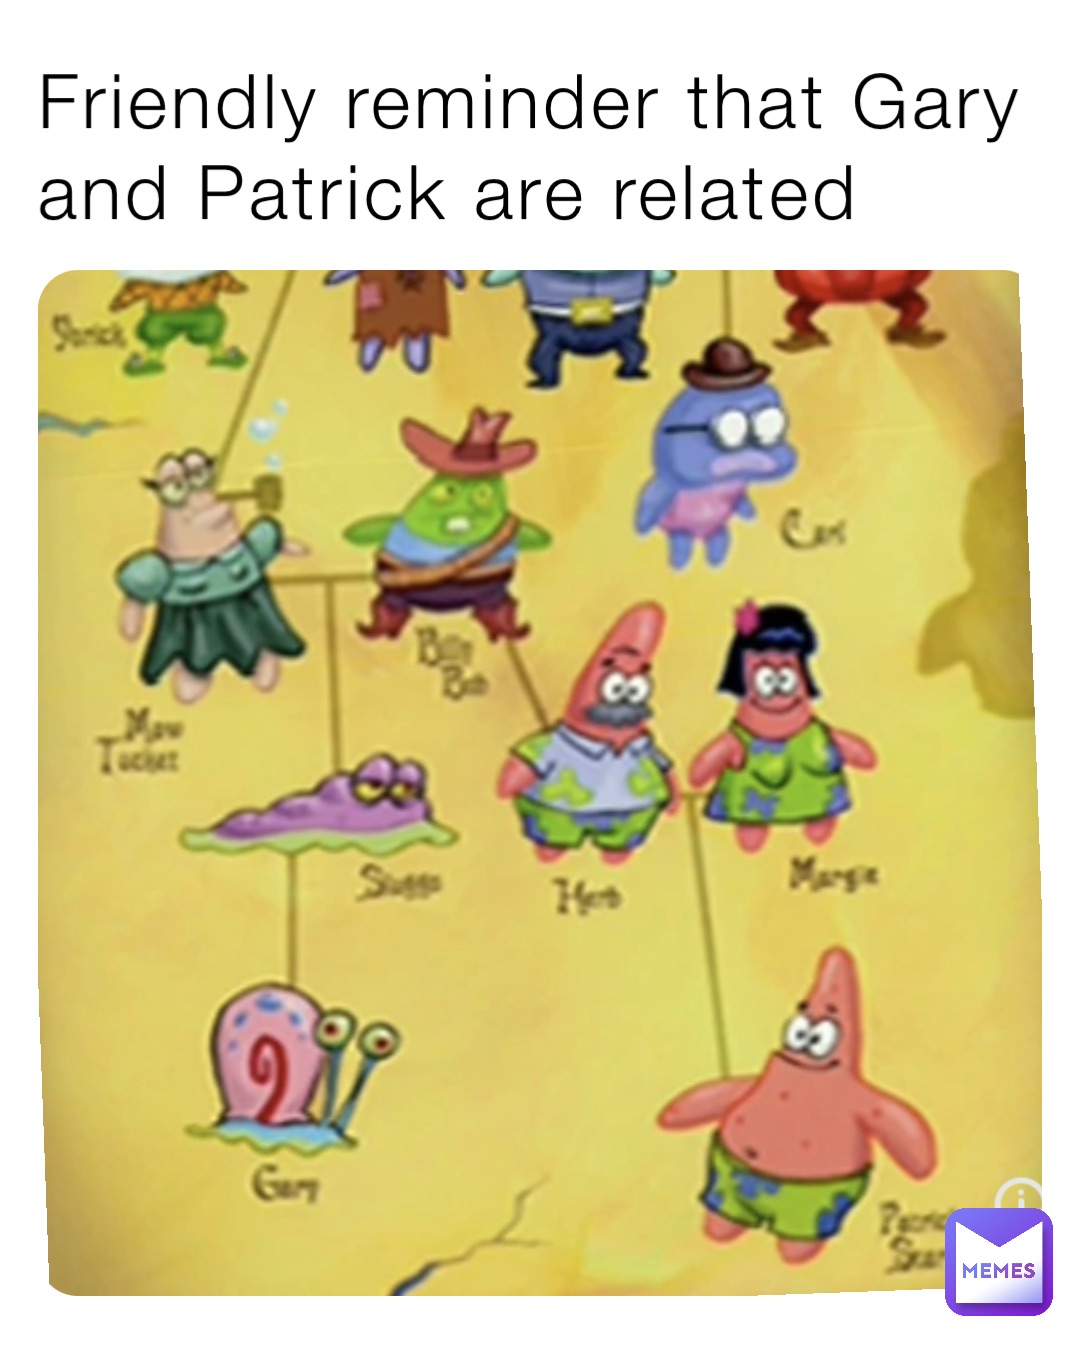 Friendly reminder that Gary and Patrick are related